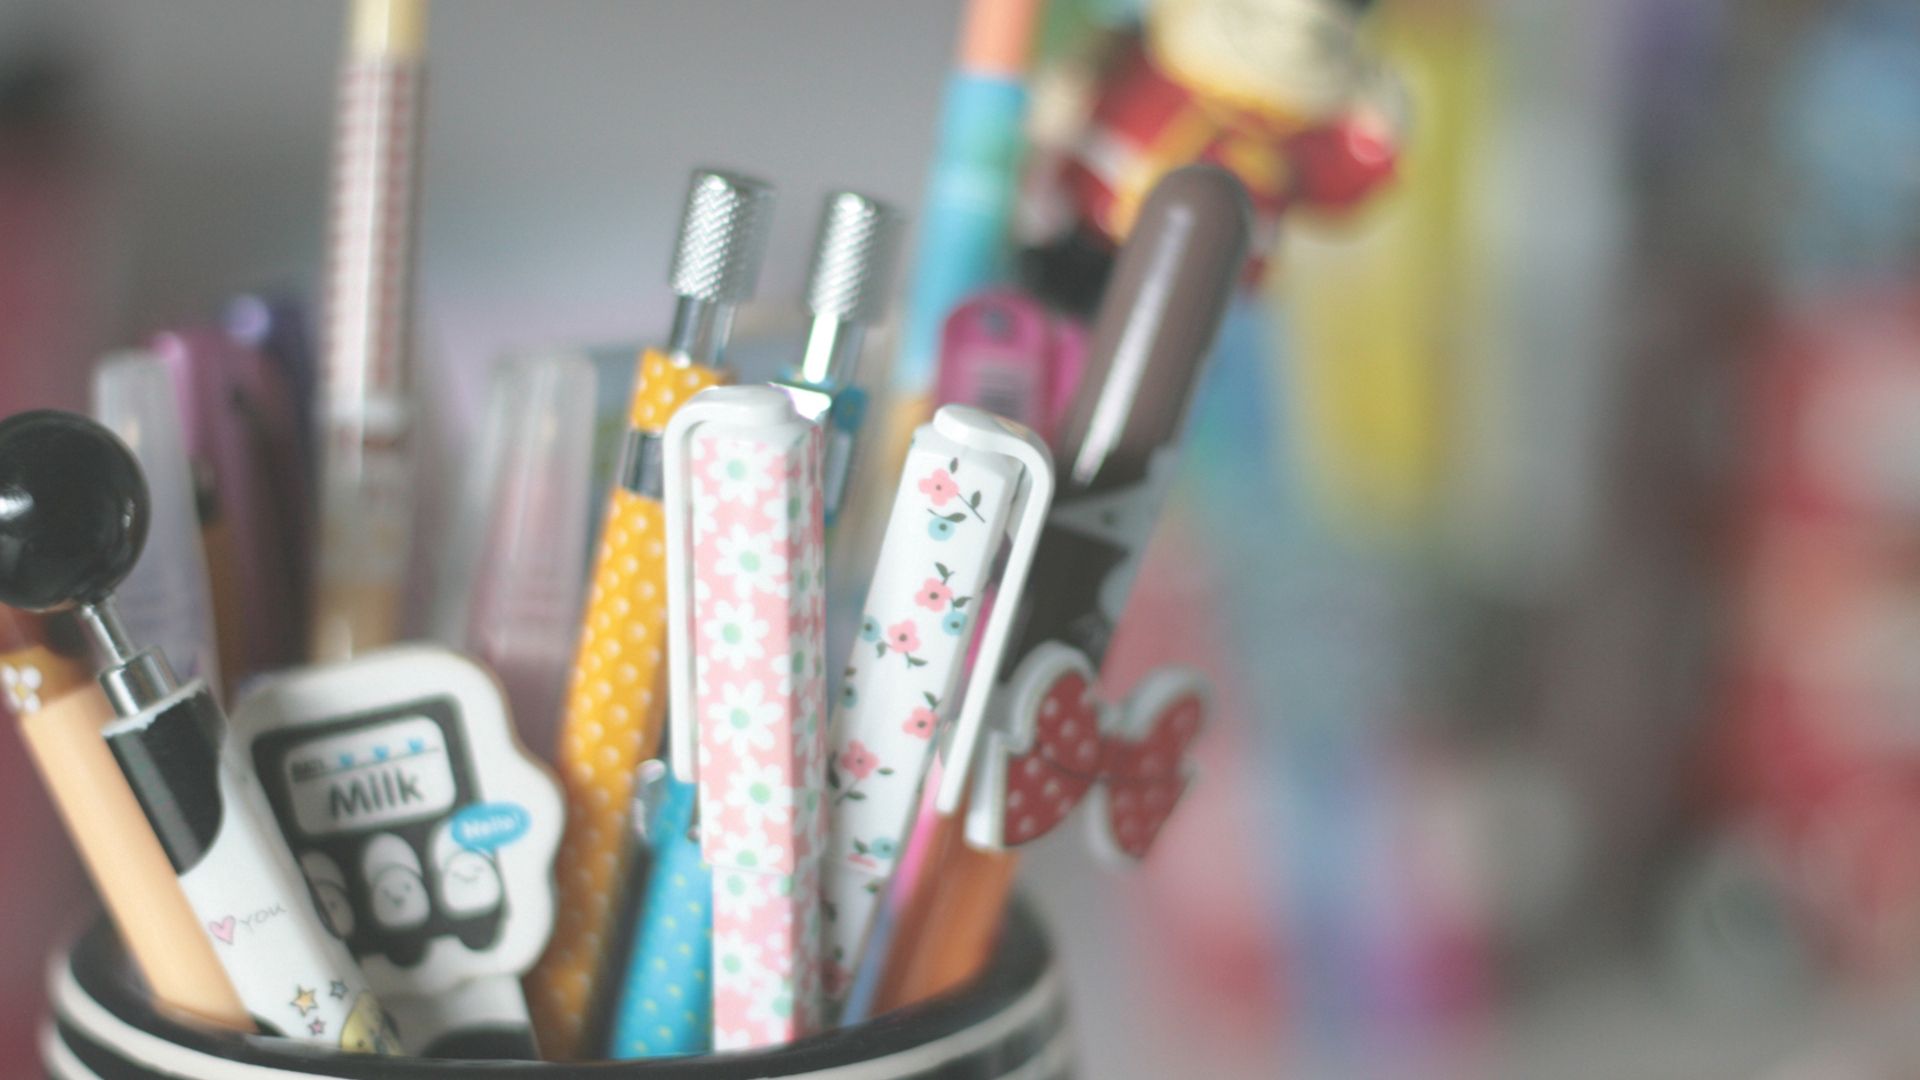 miscellanea, miscellaneous, multicolored, motley, blur, smooth, pencils, stand, pens, handles High Definition image